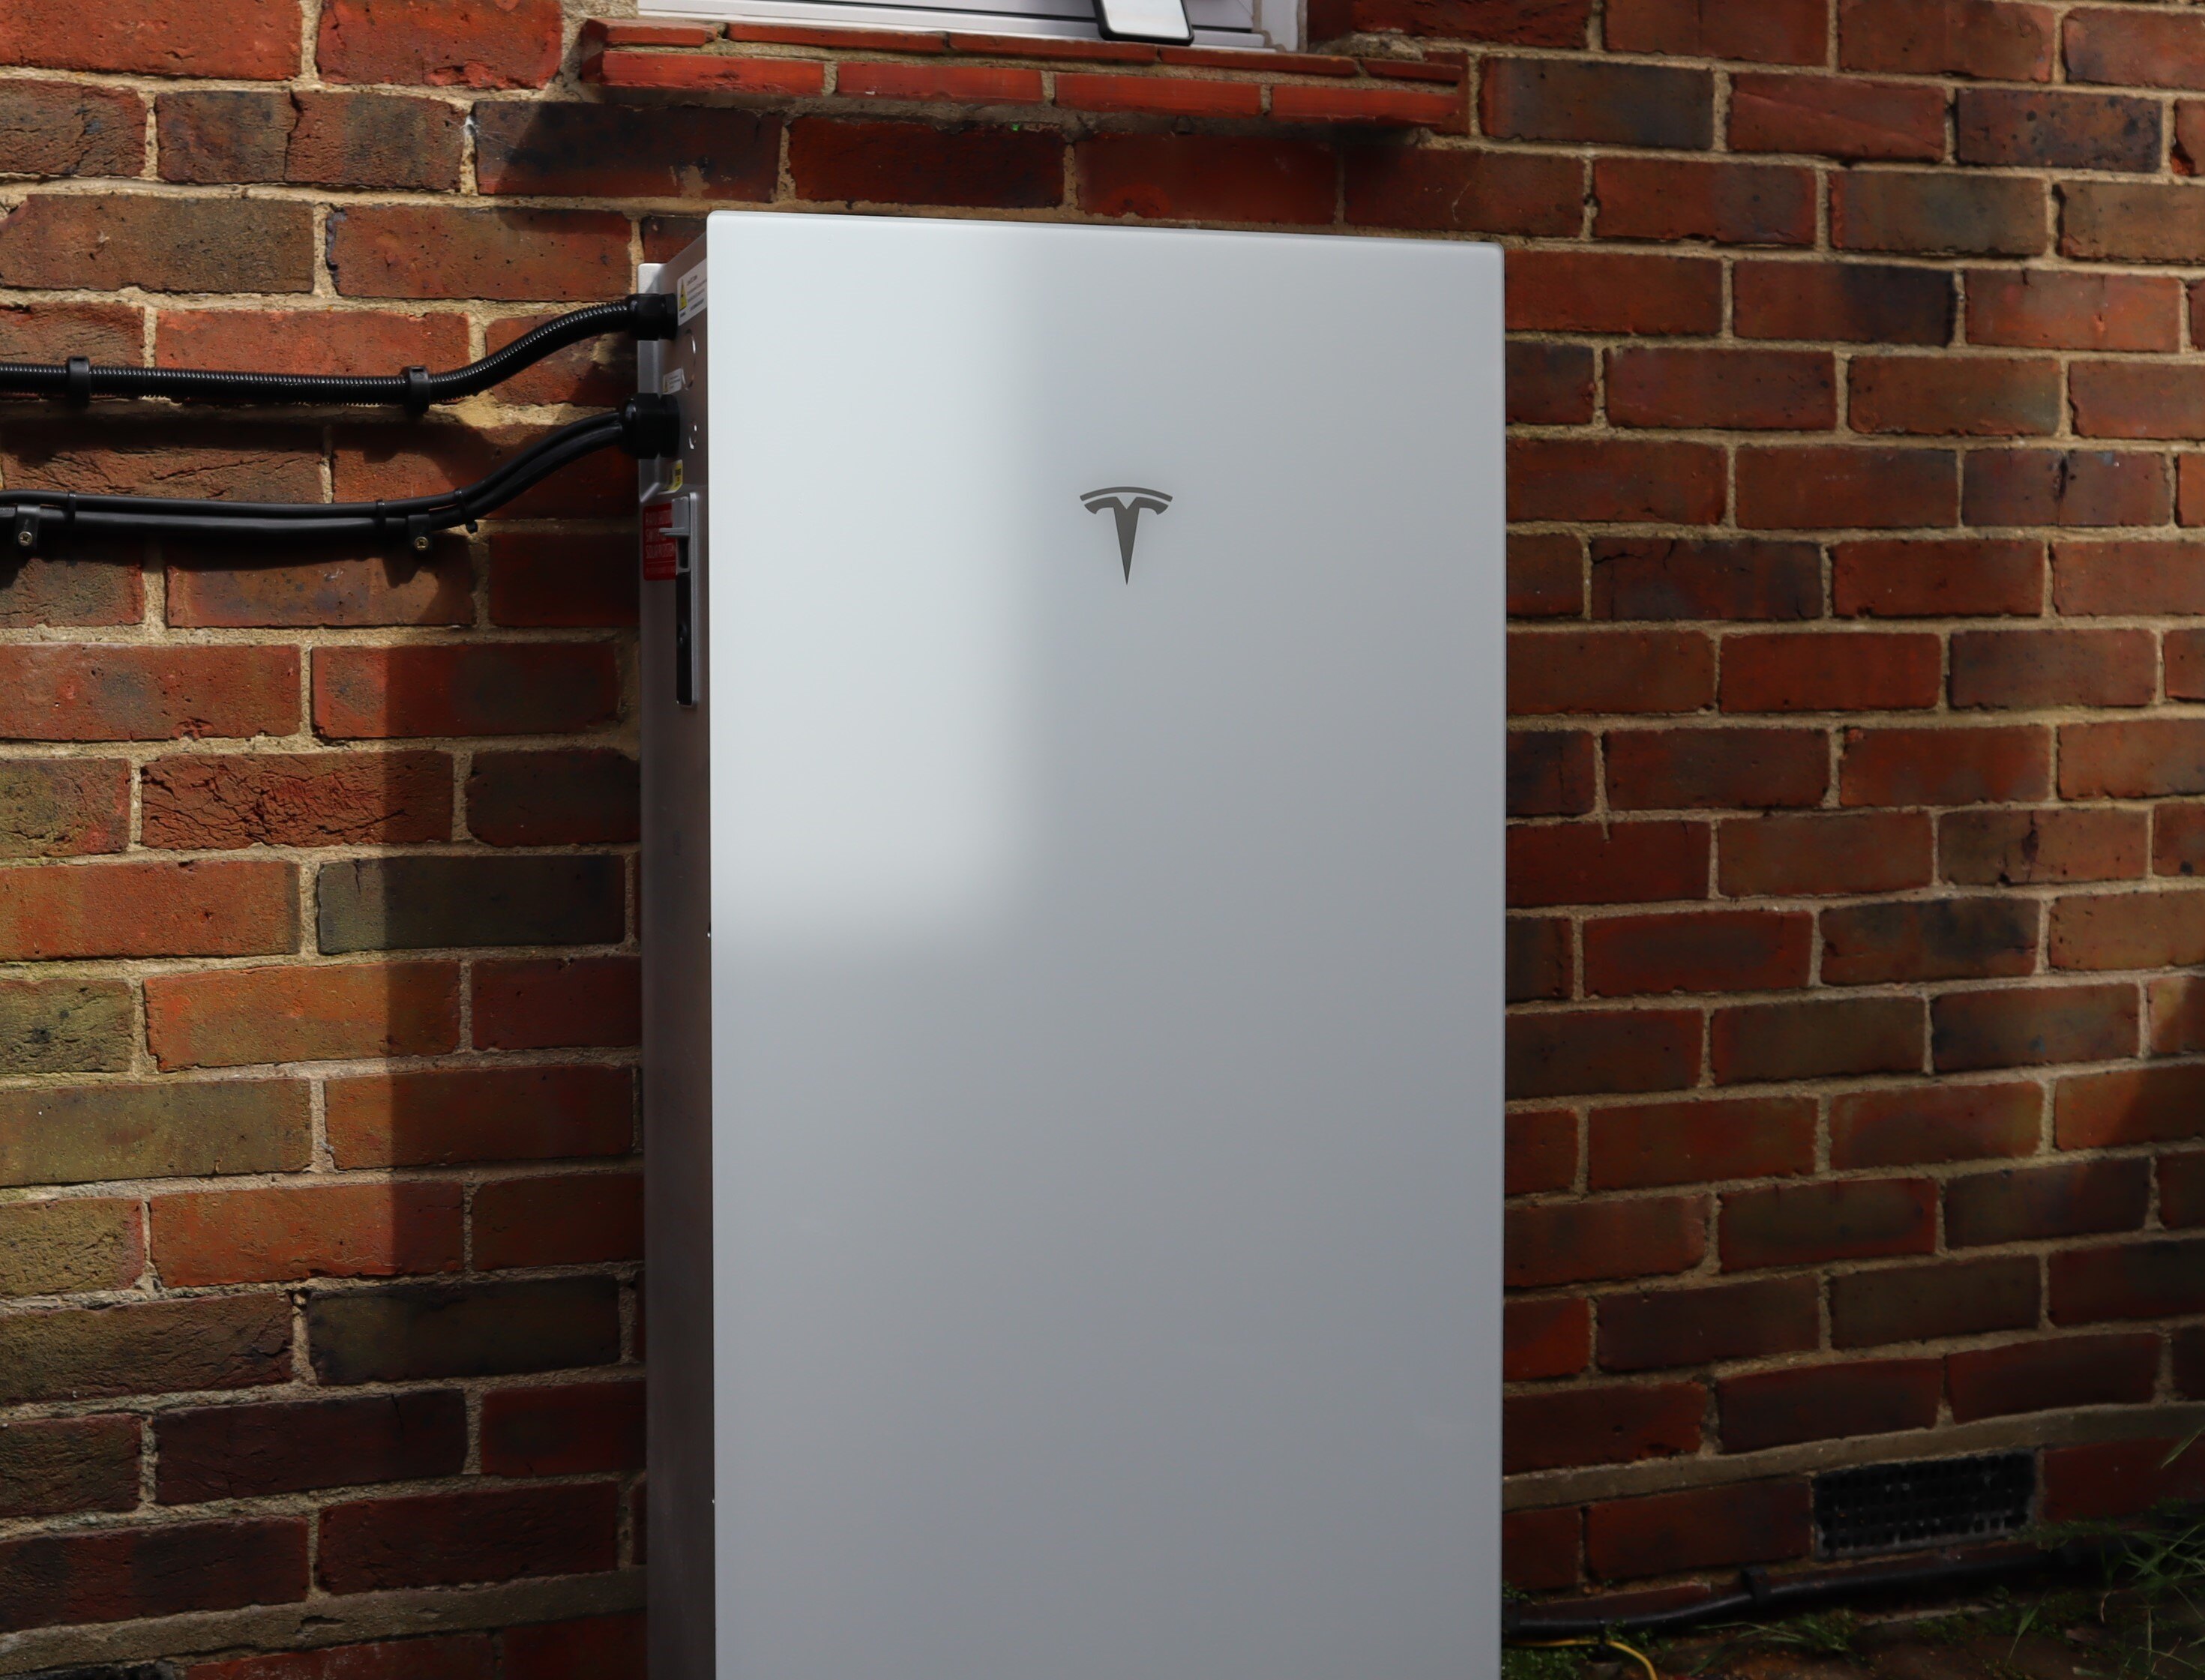 The First Tesla Powerwall 3 in the UK